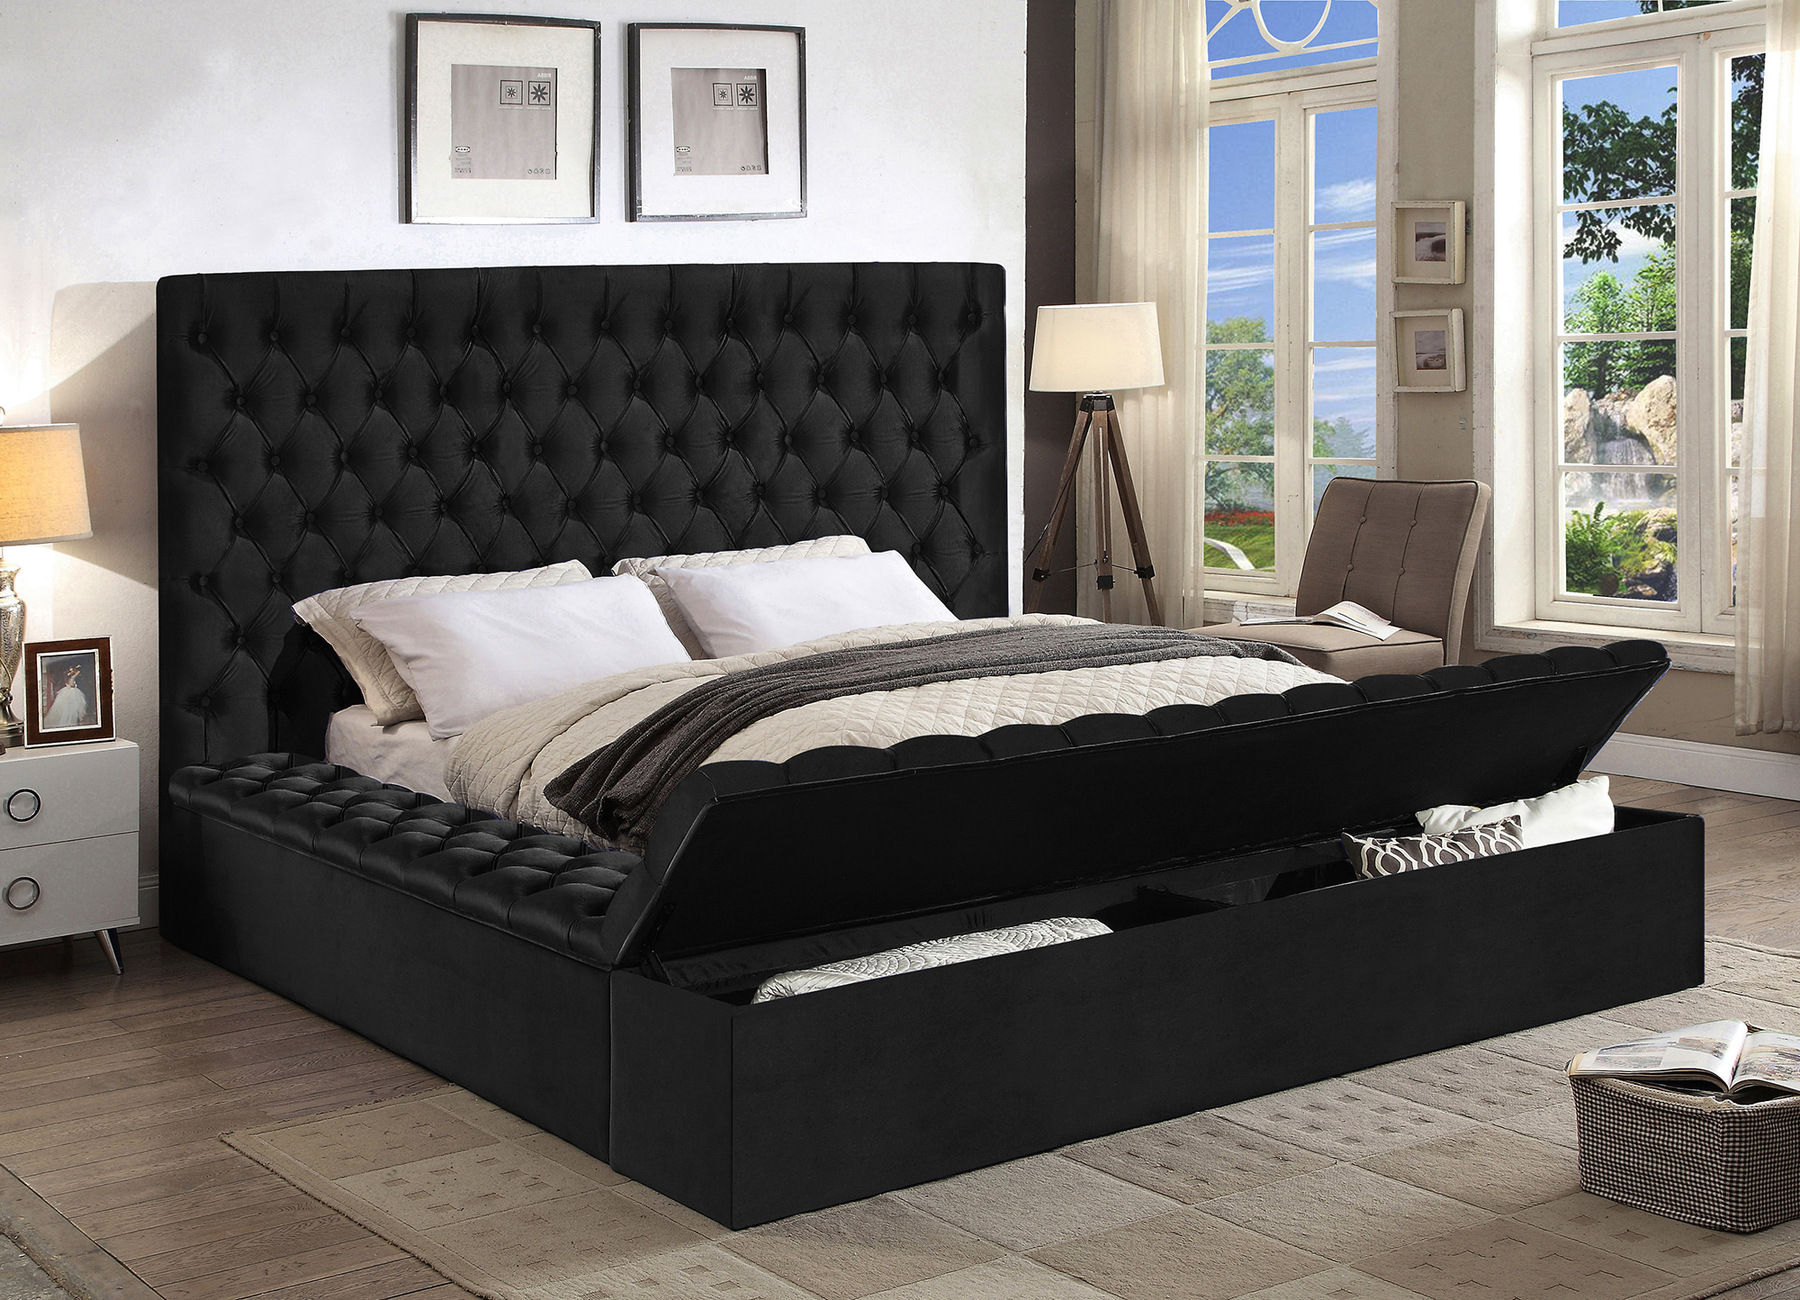 king size bed mattresses